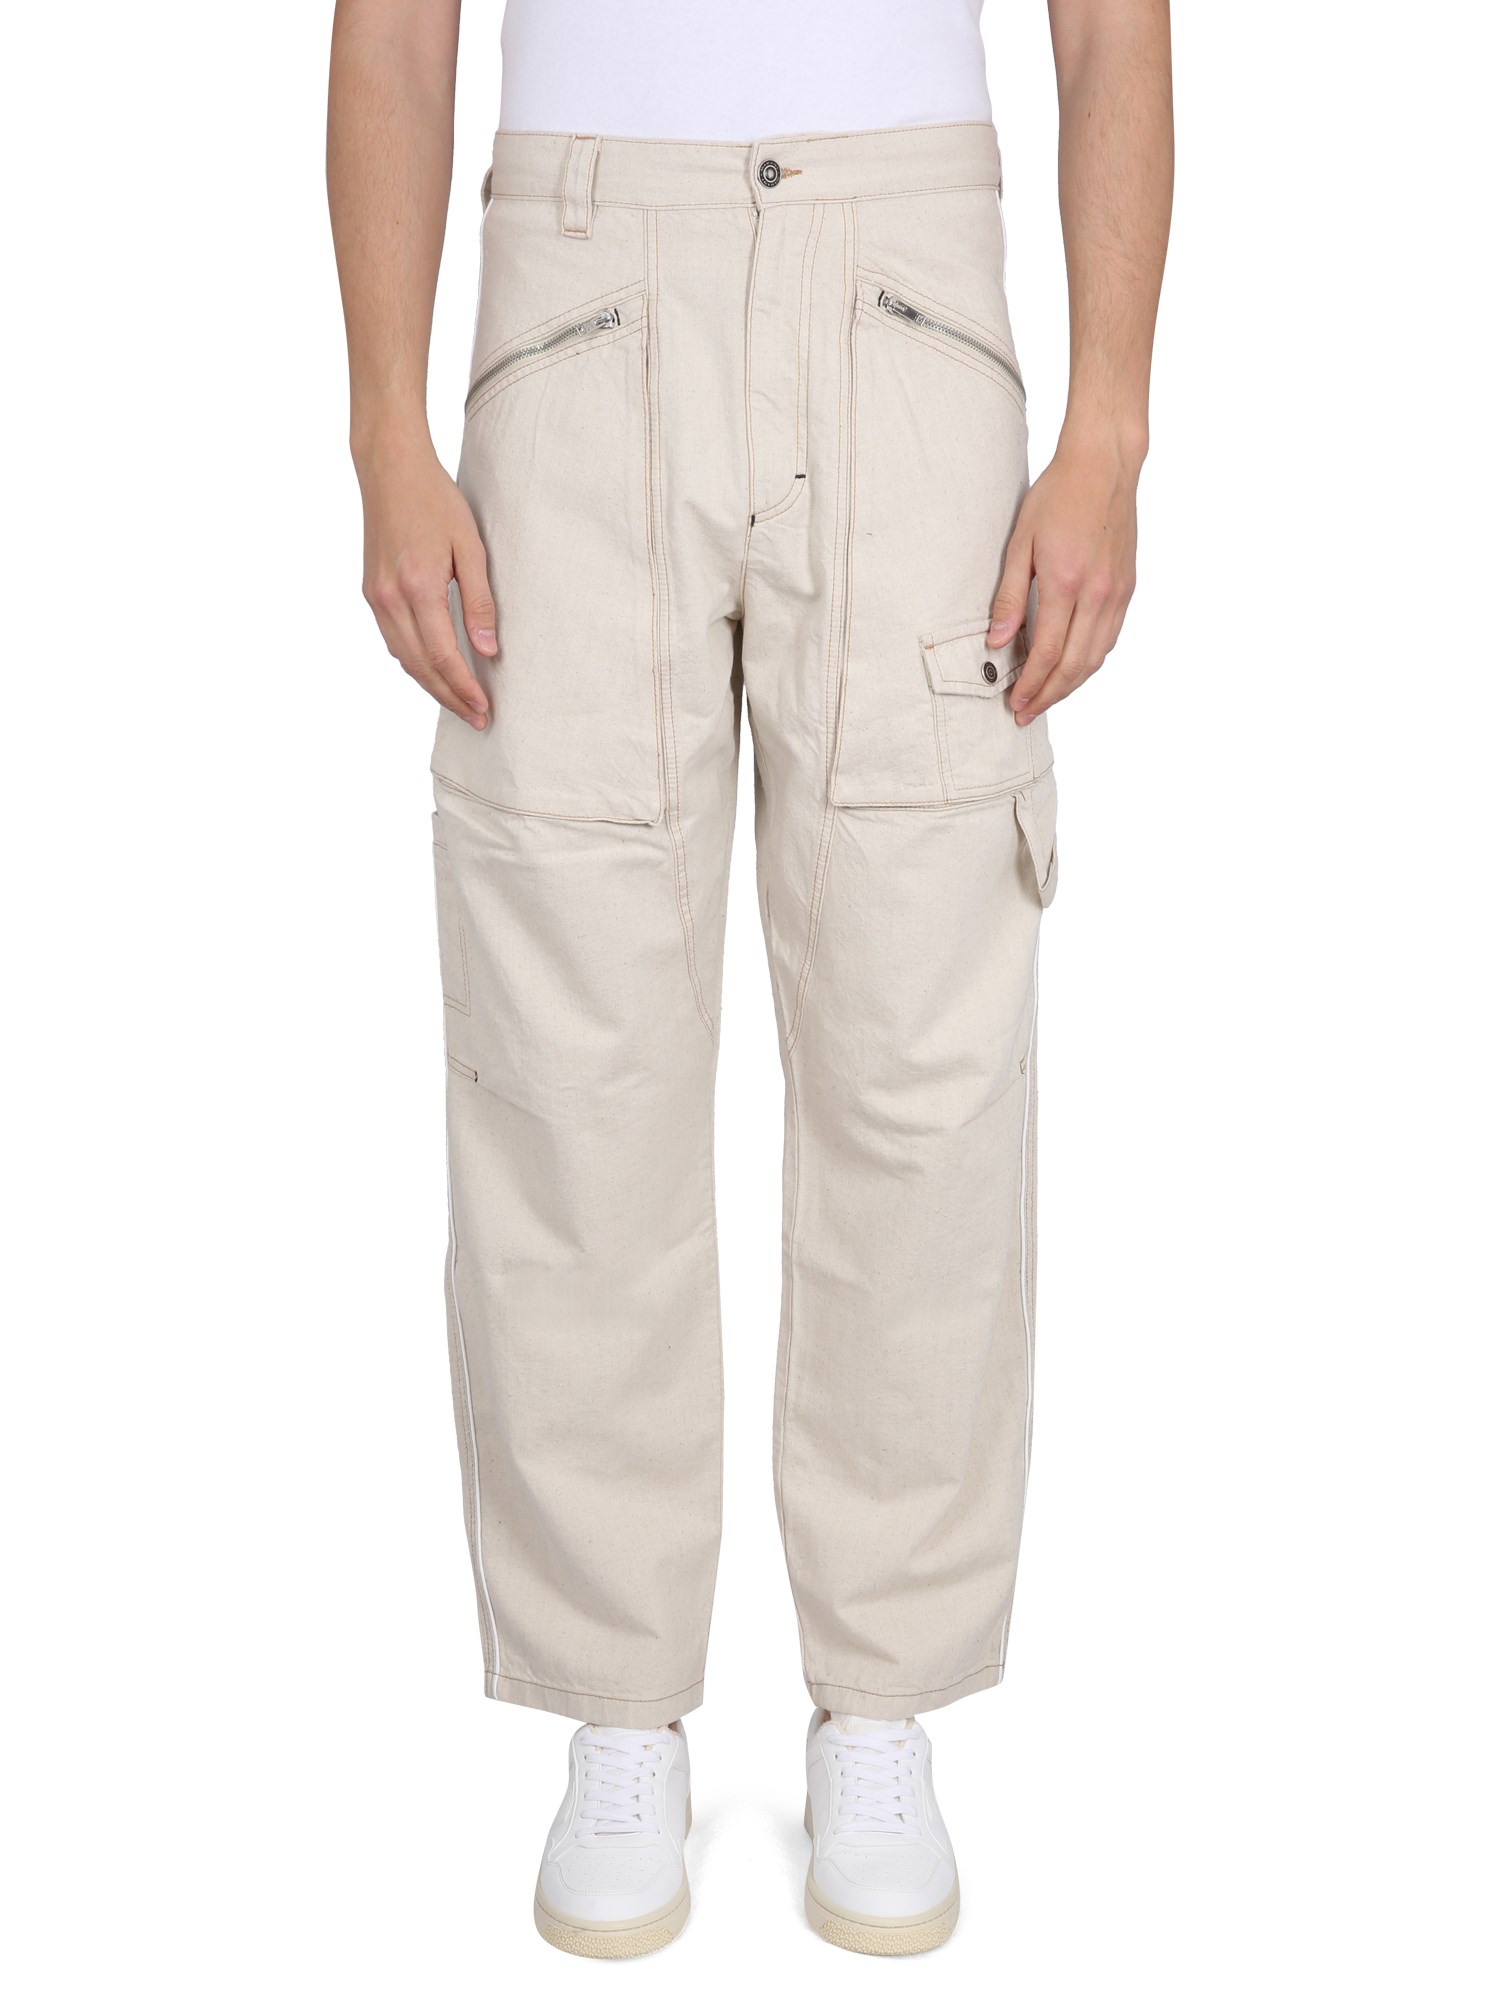 Marant Parker Trousers In Powder